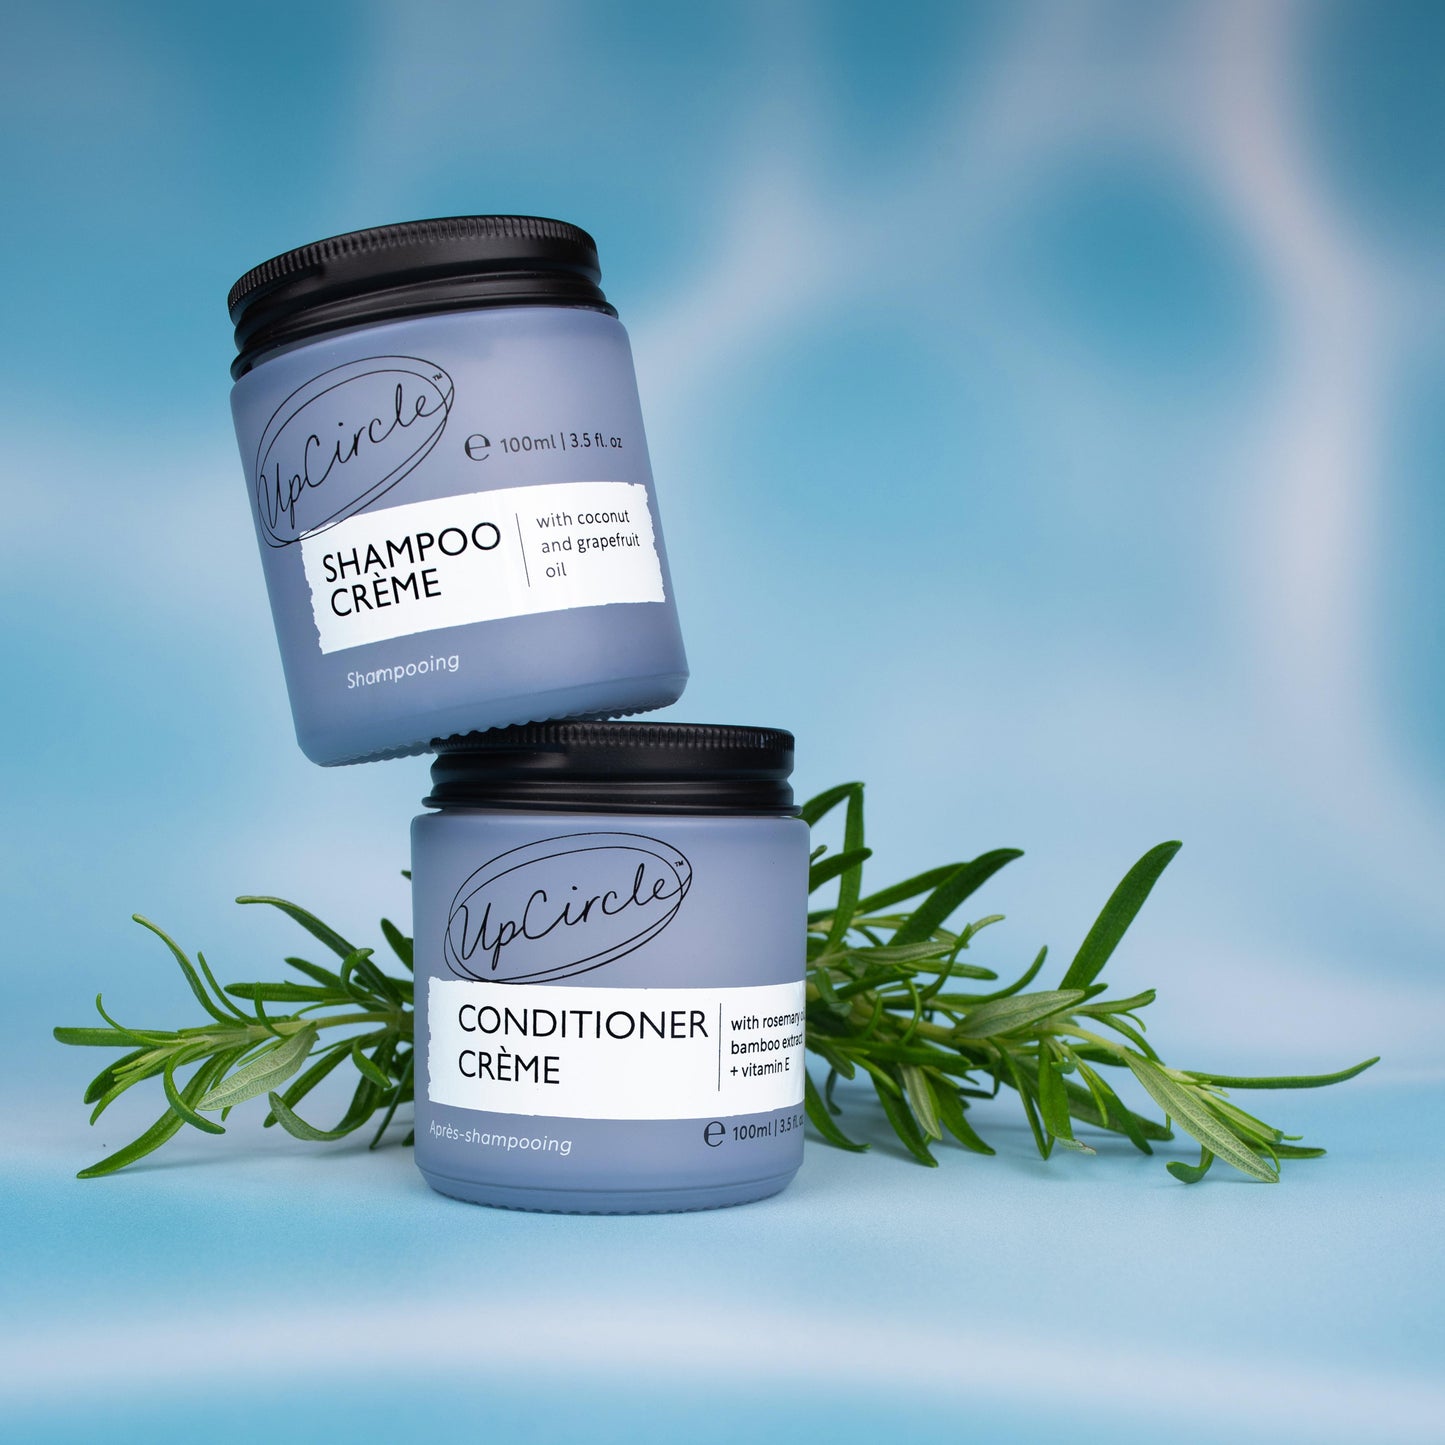 lifestyle photo of upcircle's shampoo creme and conditioner creme on a blue iridescent background. the shampoo is balanced at an angle on top of the conditioner. both products are in light blue glass jars with black aluminium lids. there is a sprig of rosemary in the background